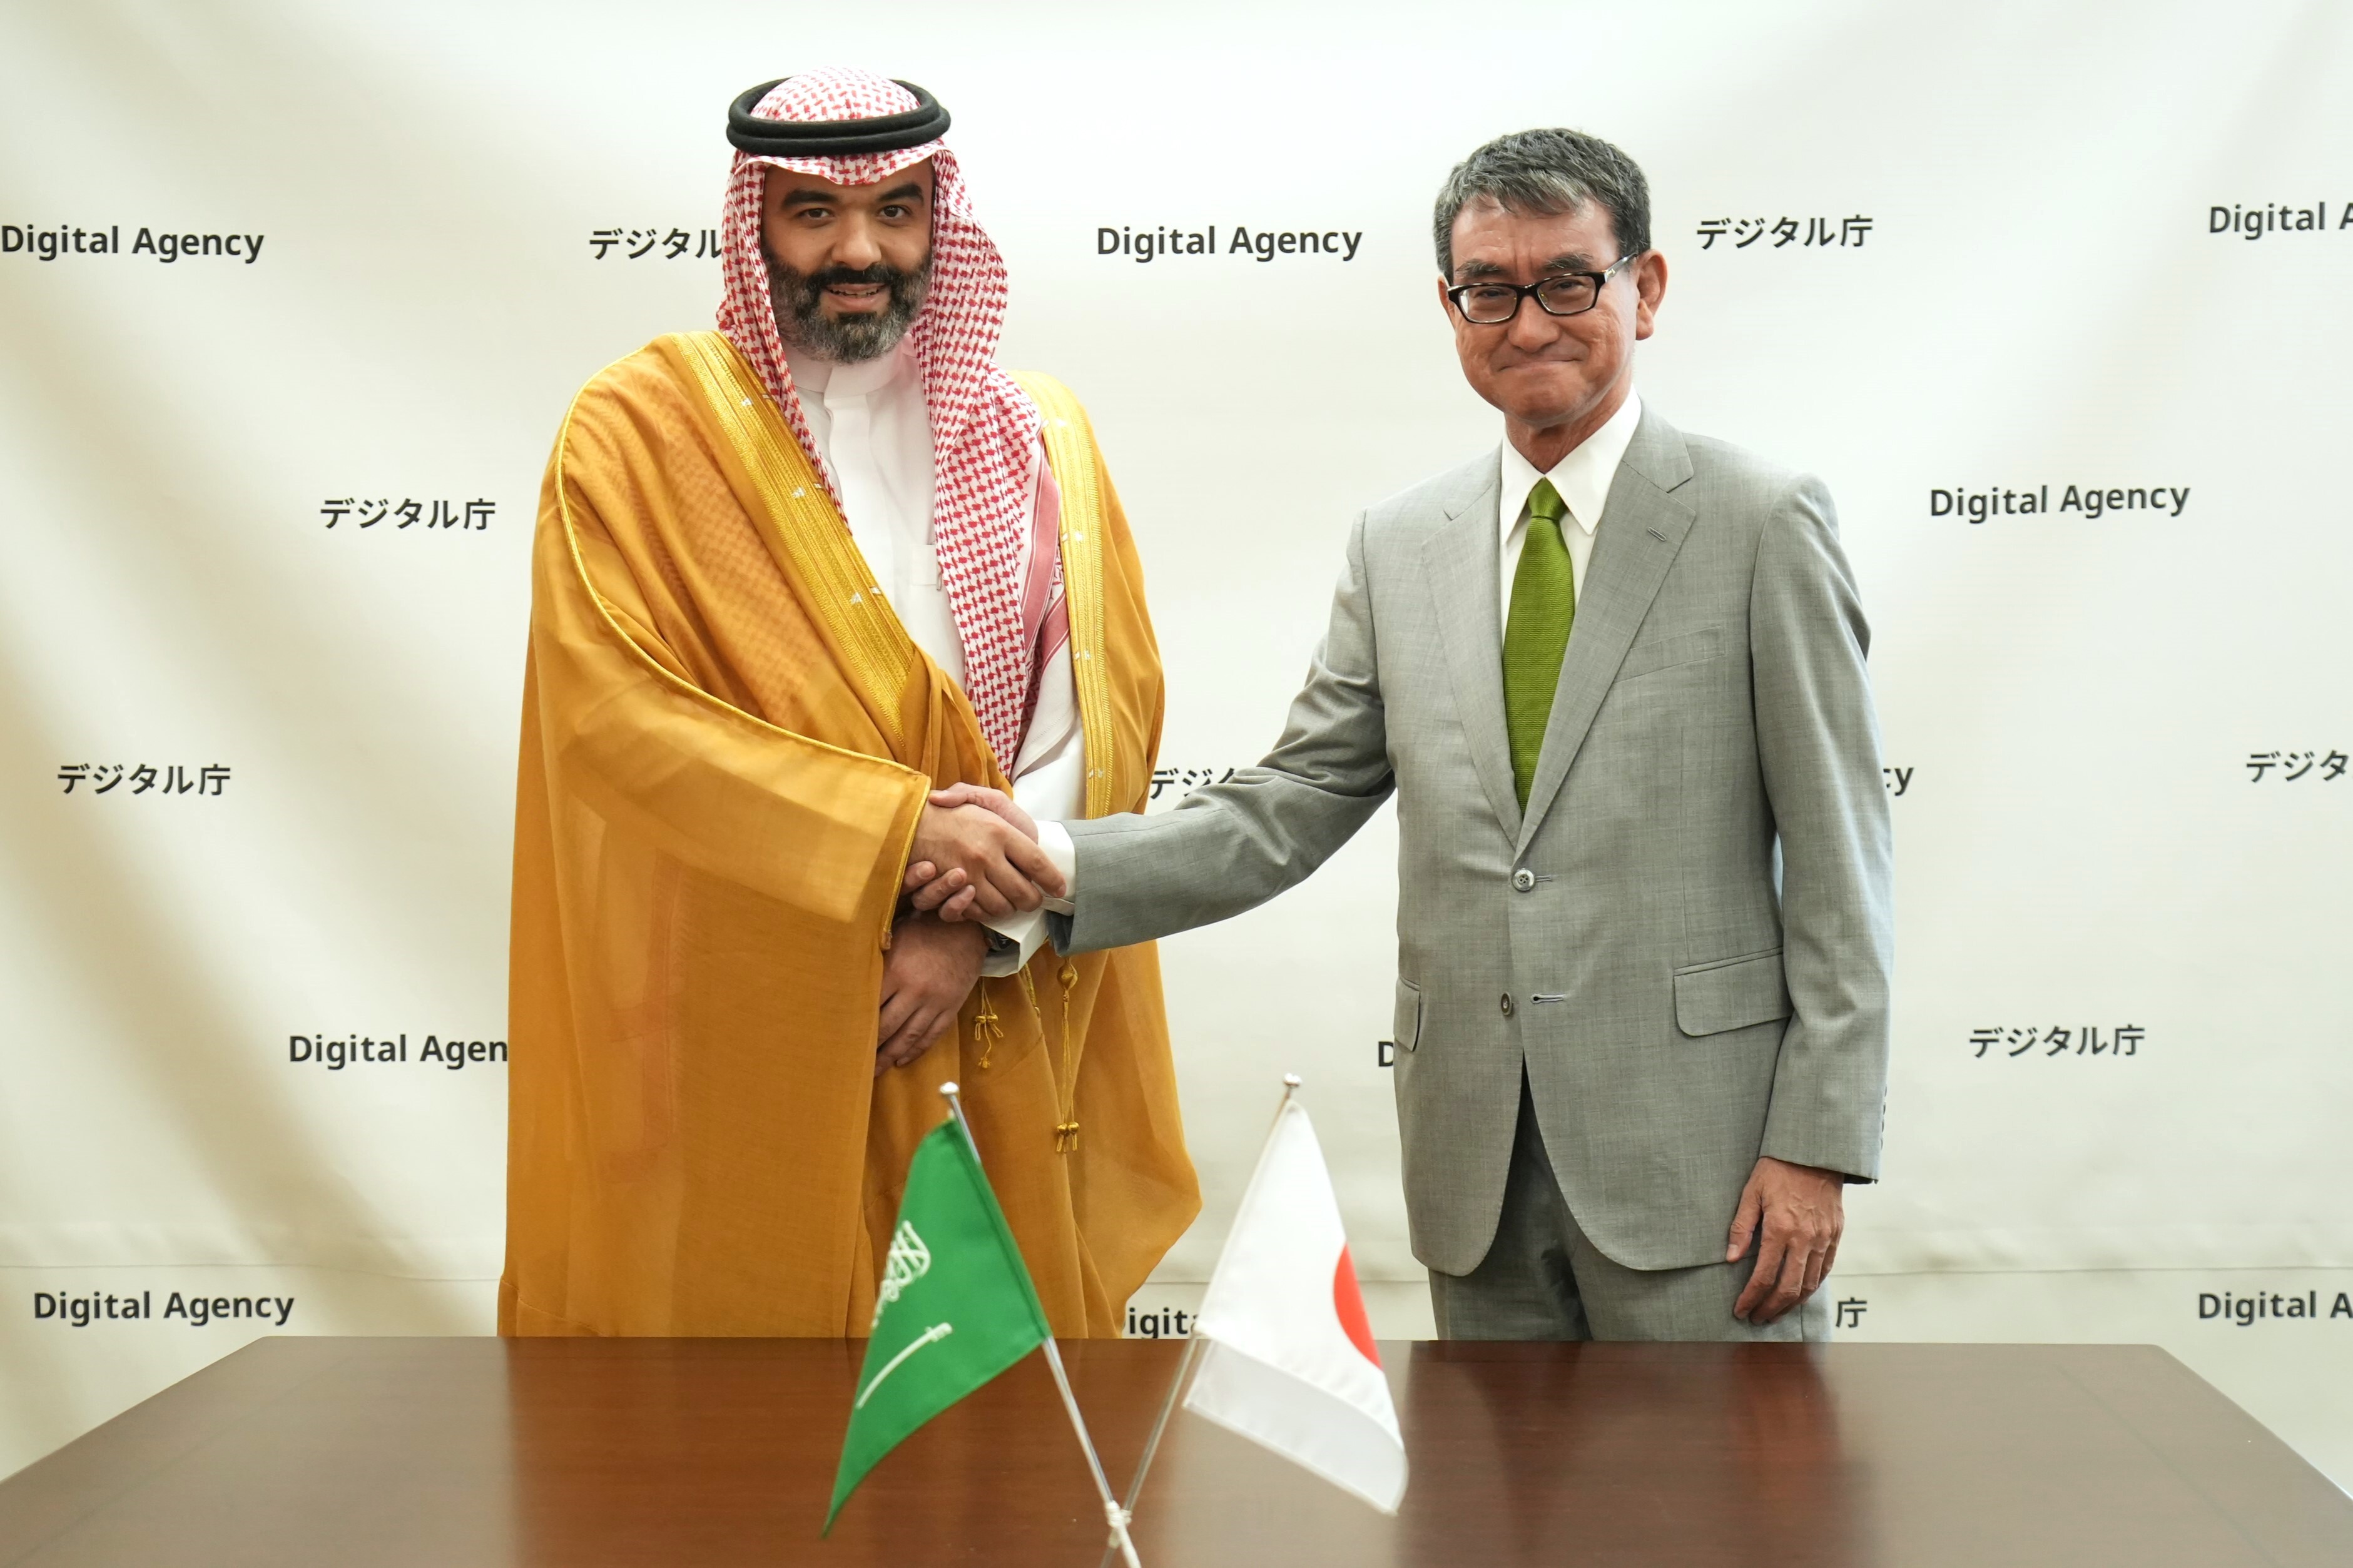 Photo of Minister Alswaha (left) and Minister Kono (right) shaking hands.